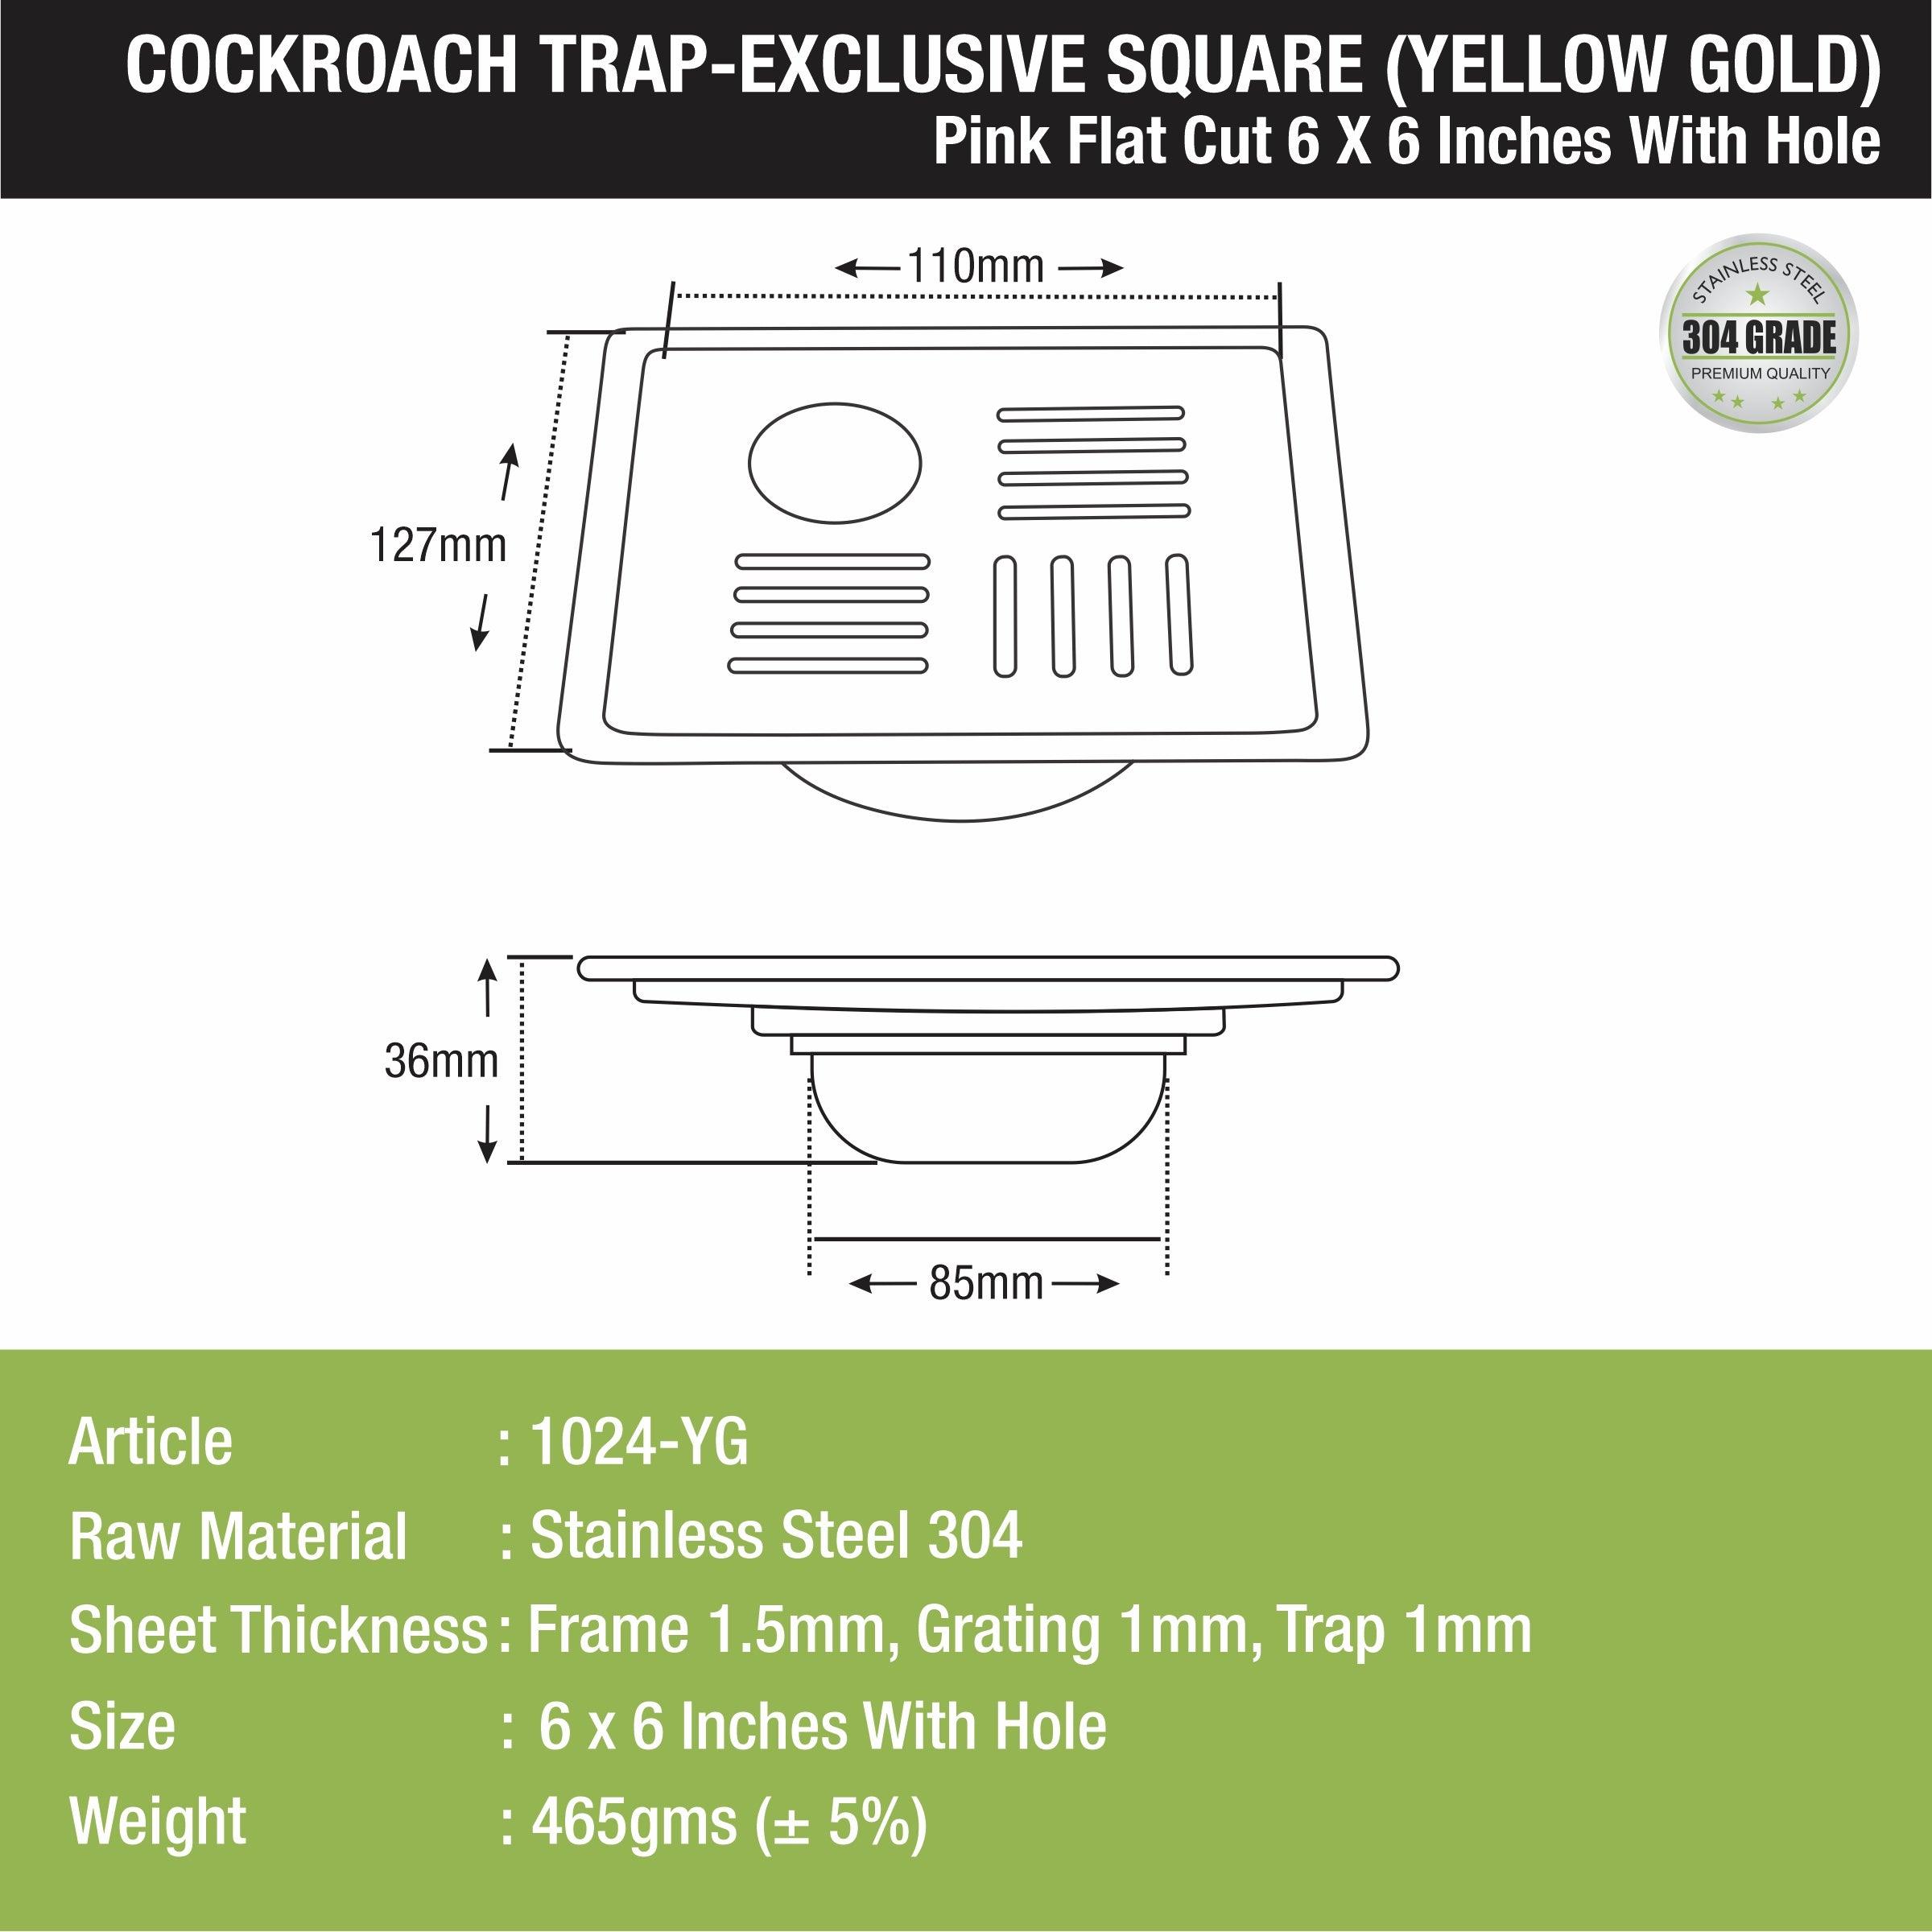 Pink Exclusive Square Flat Cut Floor Drain in Yellow Gold PVD Coating (6 x 6 Inches) with Hole & Cockroach Trap - LIPKA